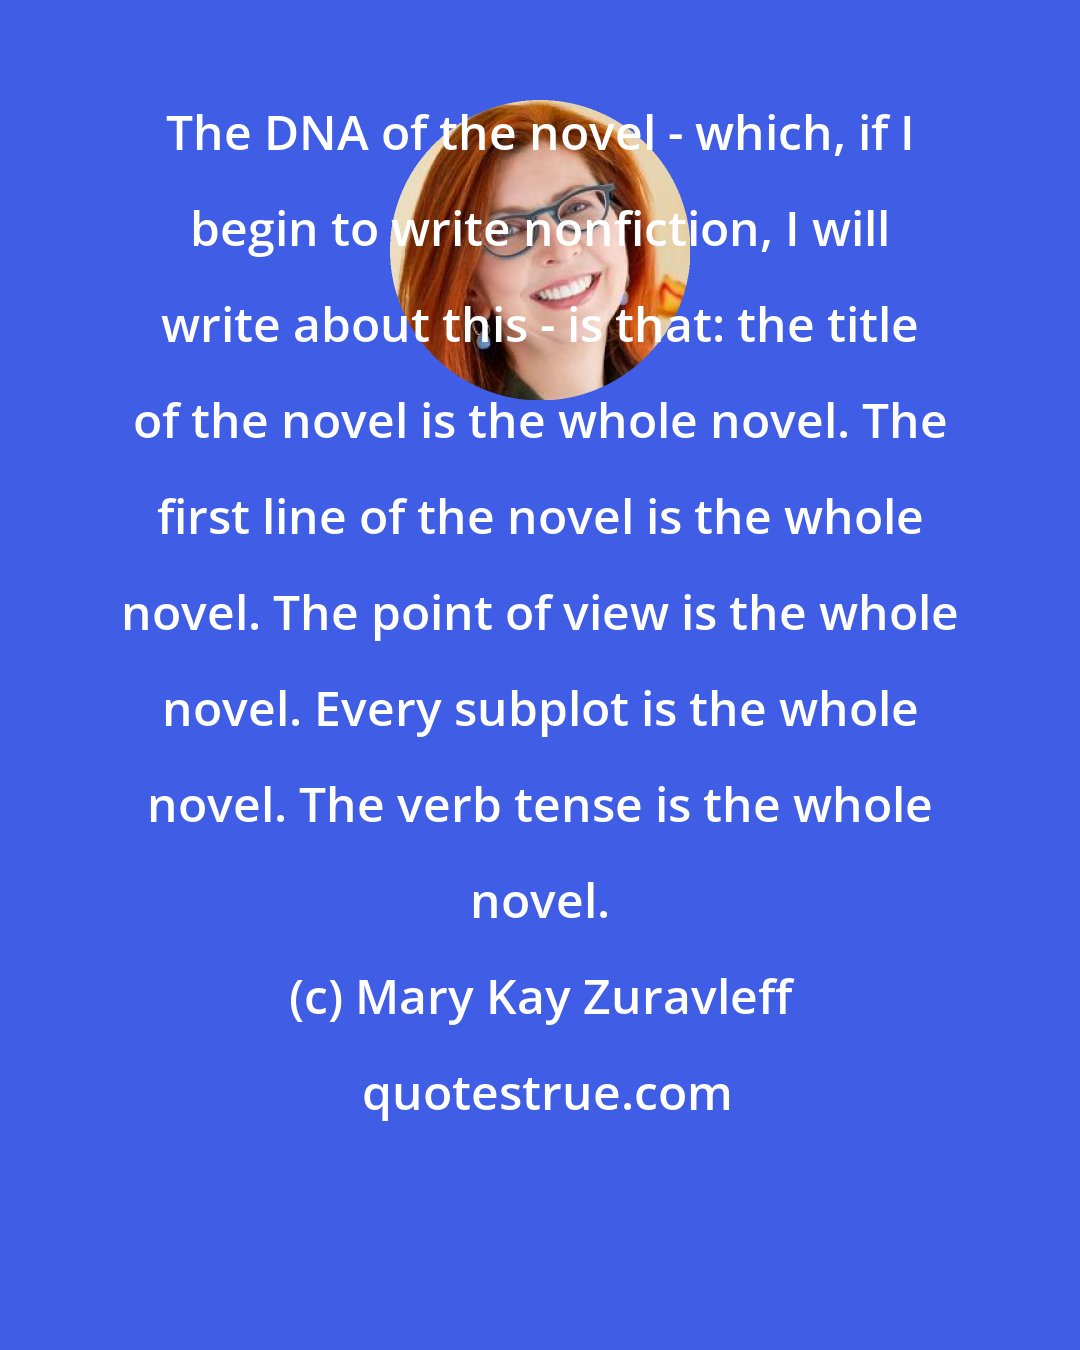 Mary Kay Zuravleff: The DNA of the novel - which, if I begin to write nonfiction, I will write about this - is that: the title of the novel is the whole novel. The first line of the novel is the whole novel. The point of view is the whole novel. Every subplot is the whole novel. The verb tense is the whole novel.